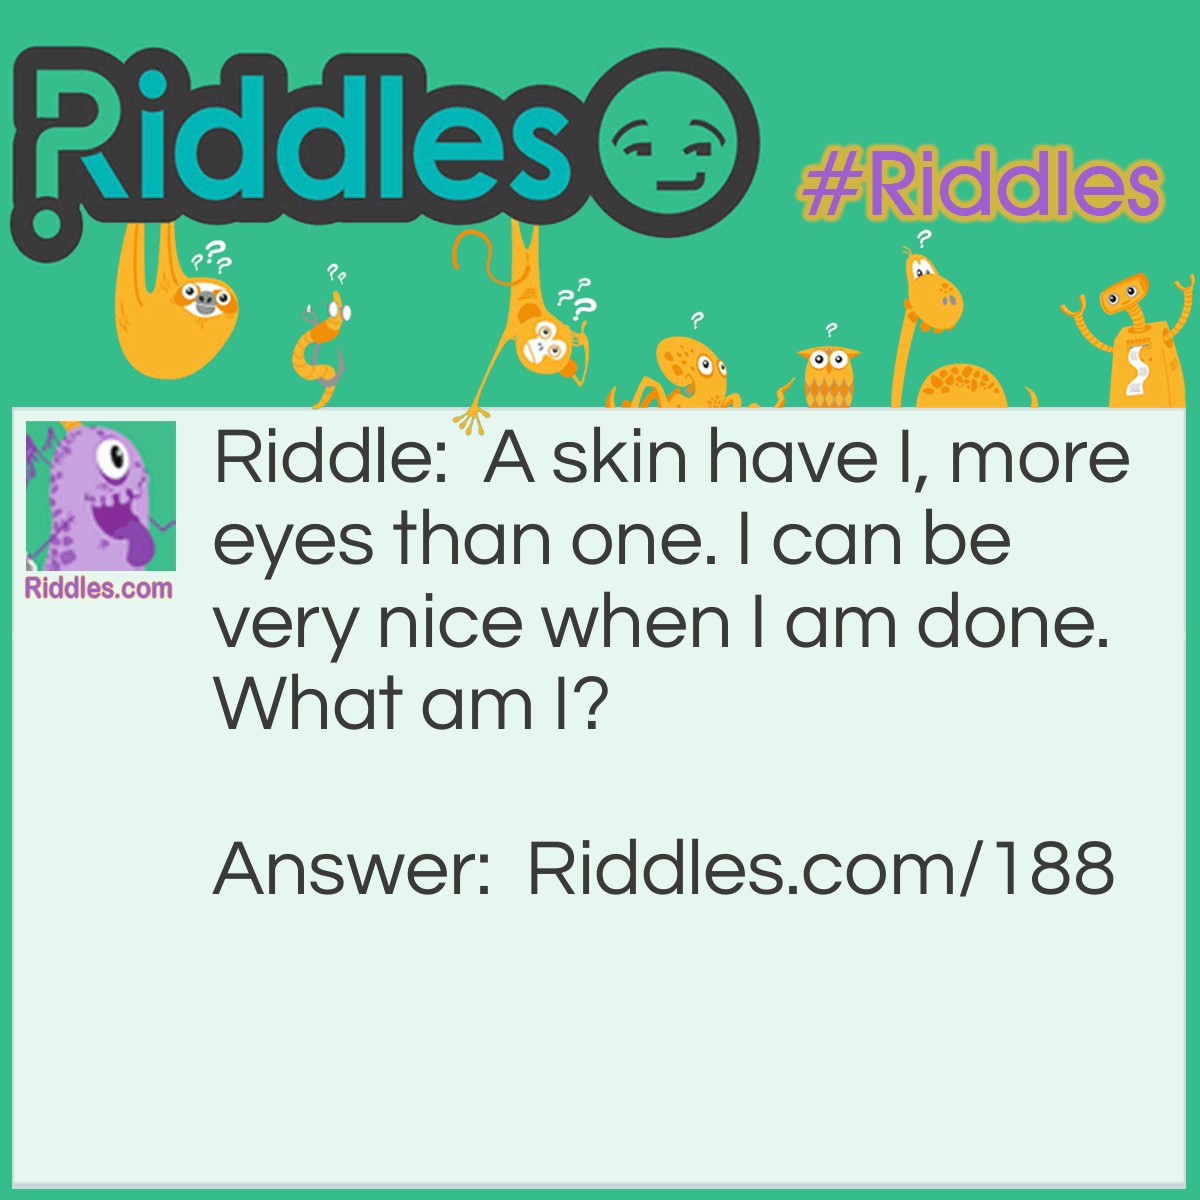 Riddle: A skin have I, more eyes than one. I can be very nice when I am done. What am I? Answer: A potato.